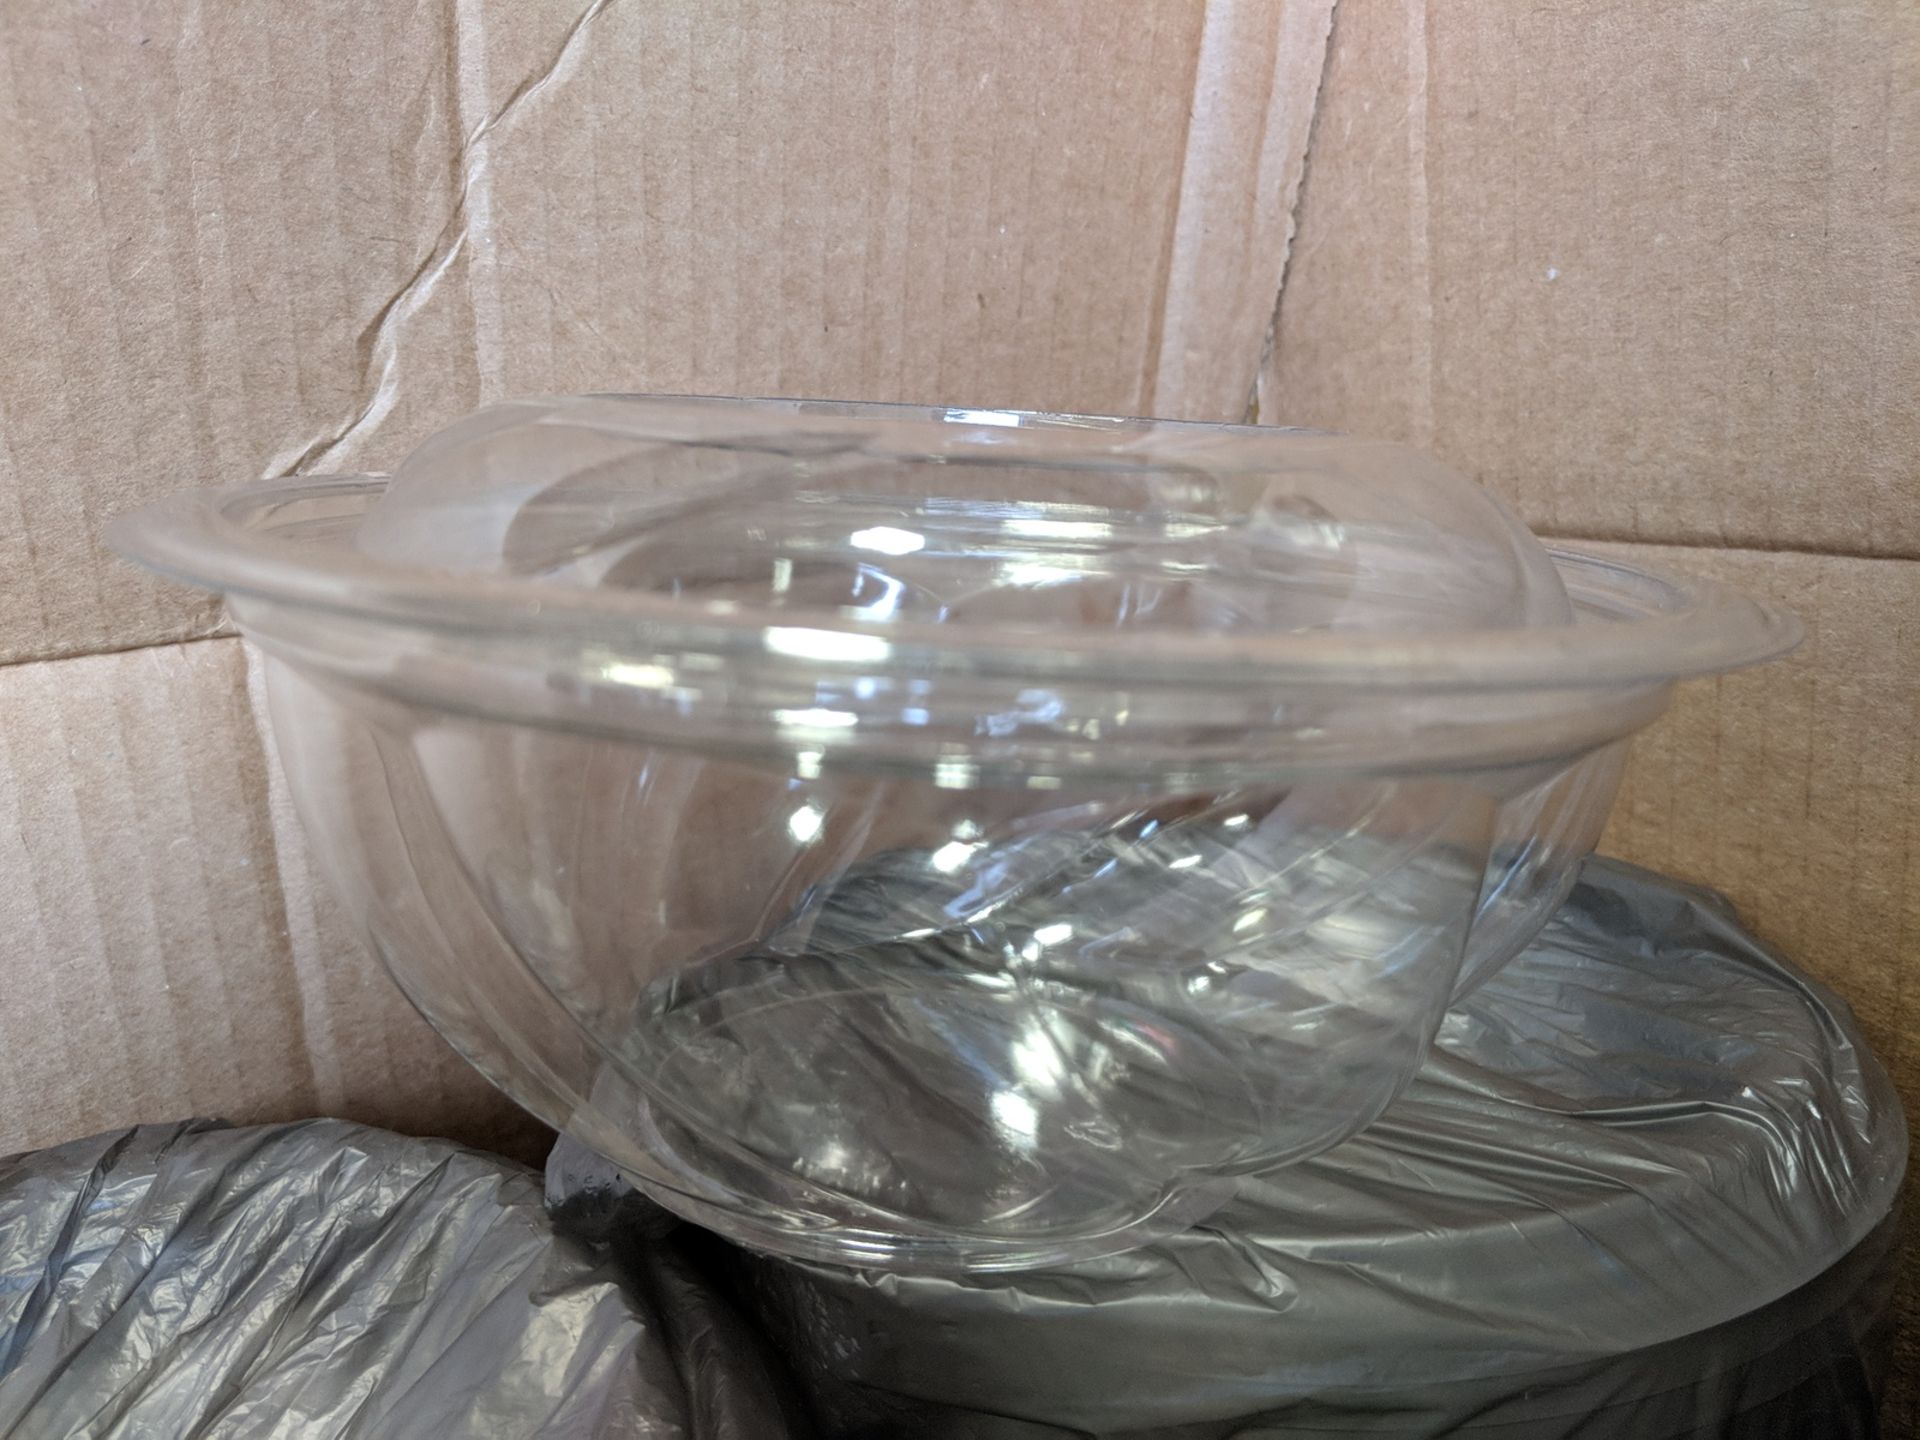 24oz/710ml, 7" Swirl Bowls with Lids, Pactic 724PSSL - Lot of 150 (300 Pieces)